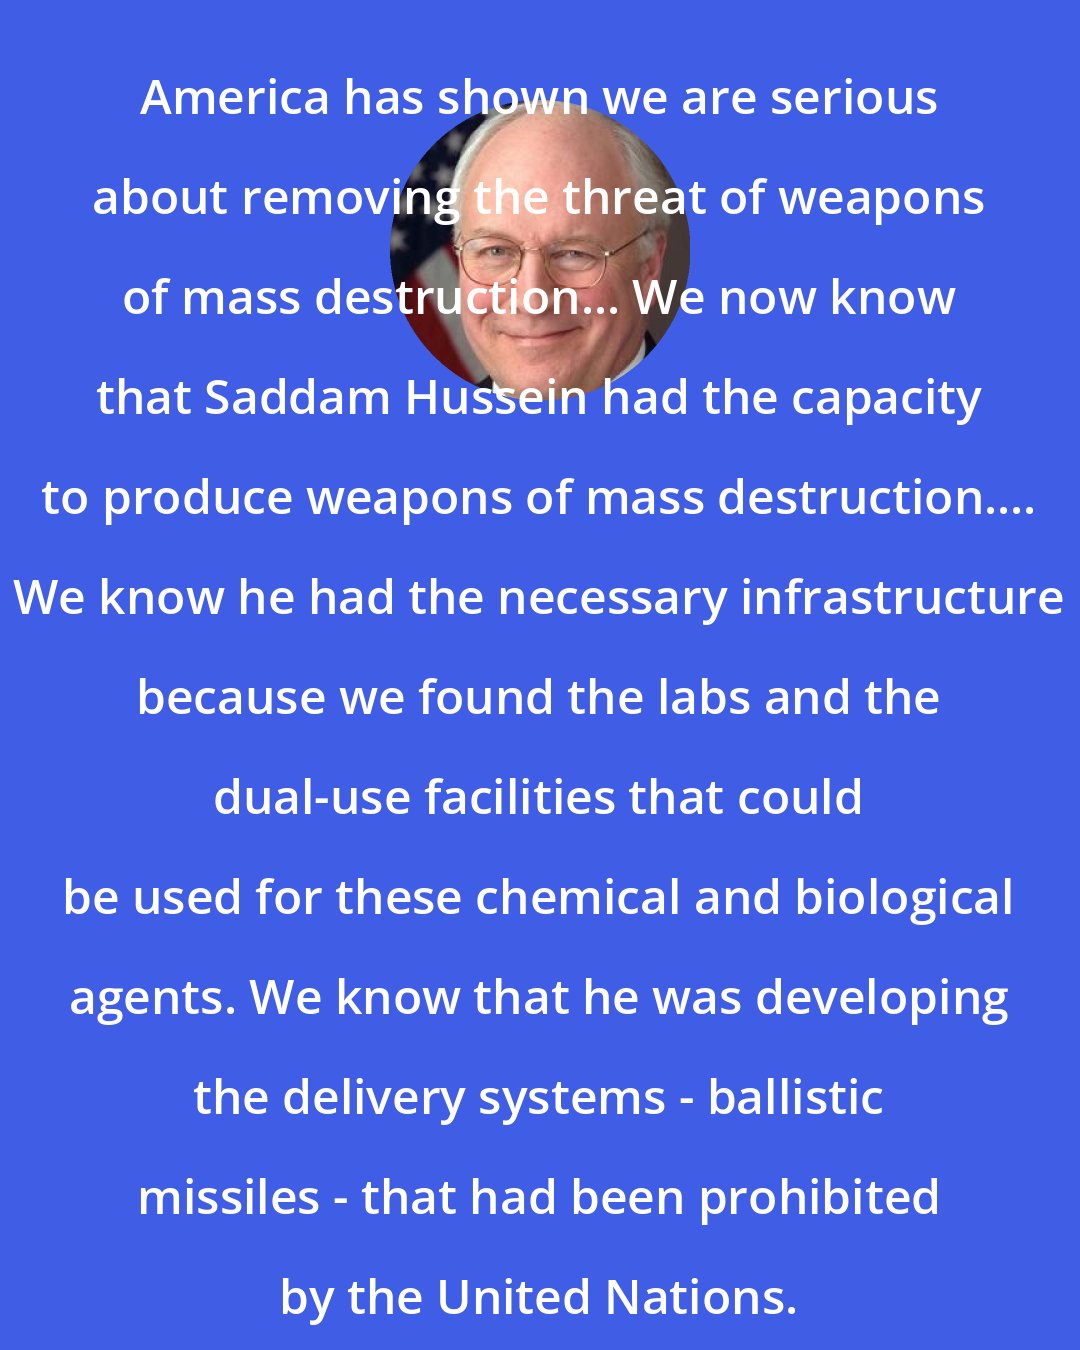 Dick Cheney: America has shown we are serious about removing the threat of weapons of mass destruction... We now know that Saddam Hussein had the capacity to produce weapons of mass destruction.... We know he had the necessary infrastructure because we found the labs and the dual-use facilities that could be used for these chemical and biological agents. We know that he was developing the delivery systems - ballistic missiles - that had been prohibited by the United Nations.